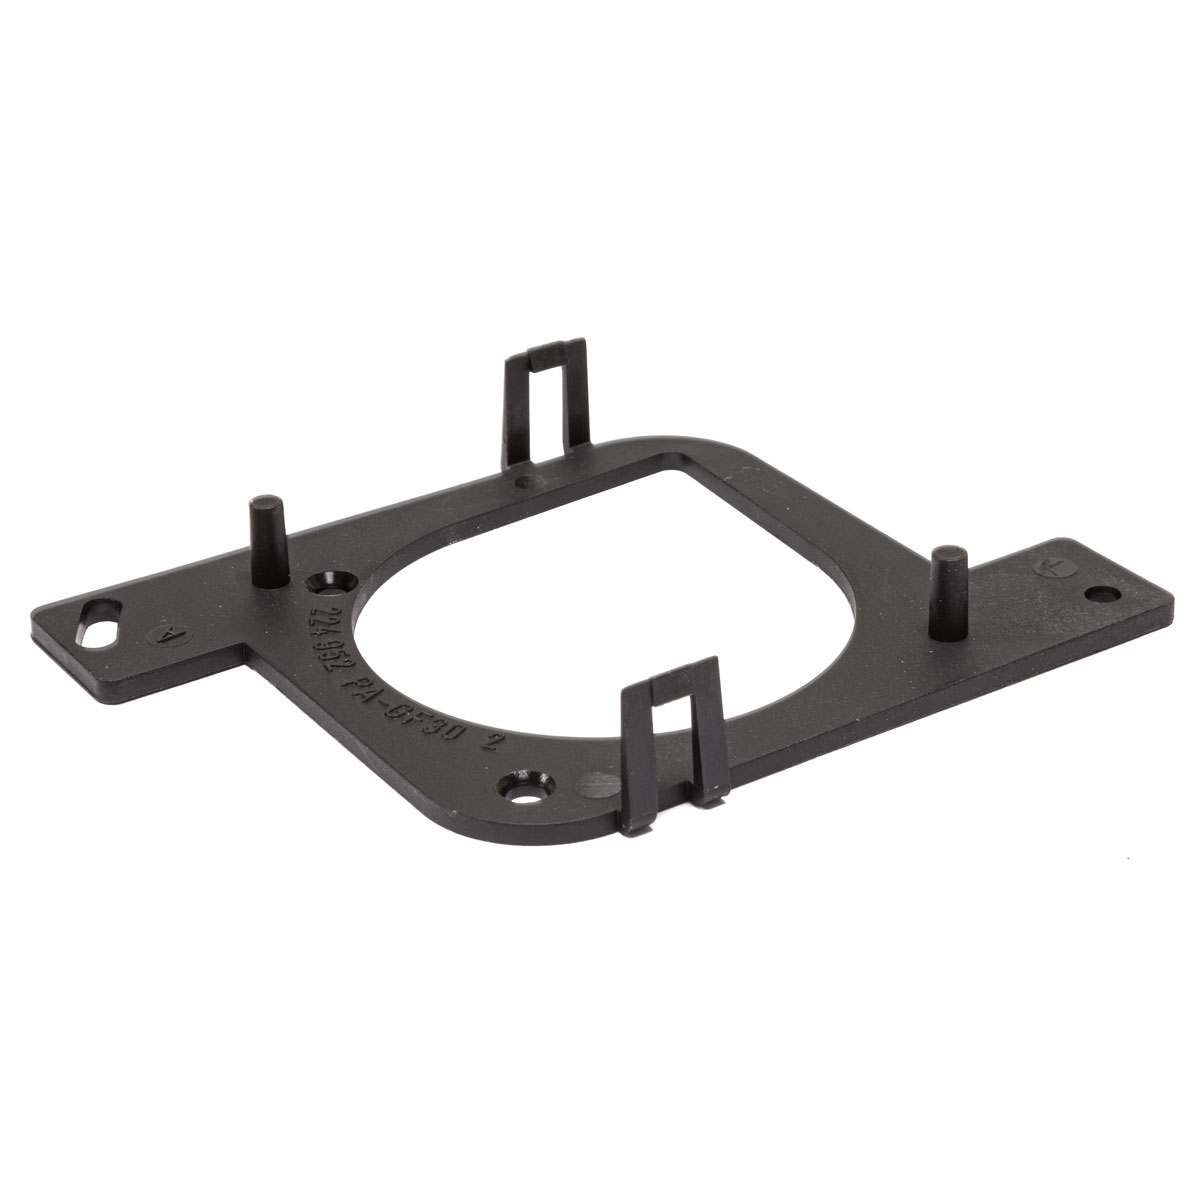 Dungs 230301 Pressure Switch Attachment Plate